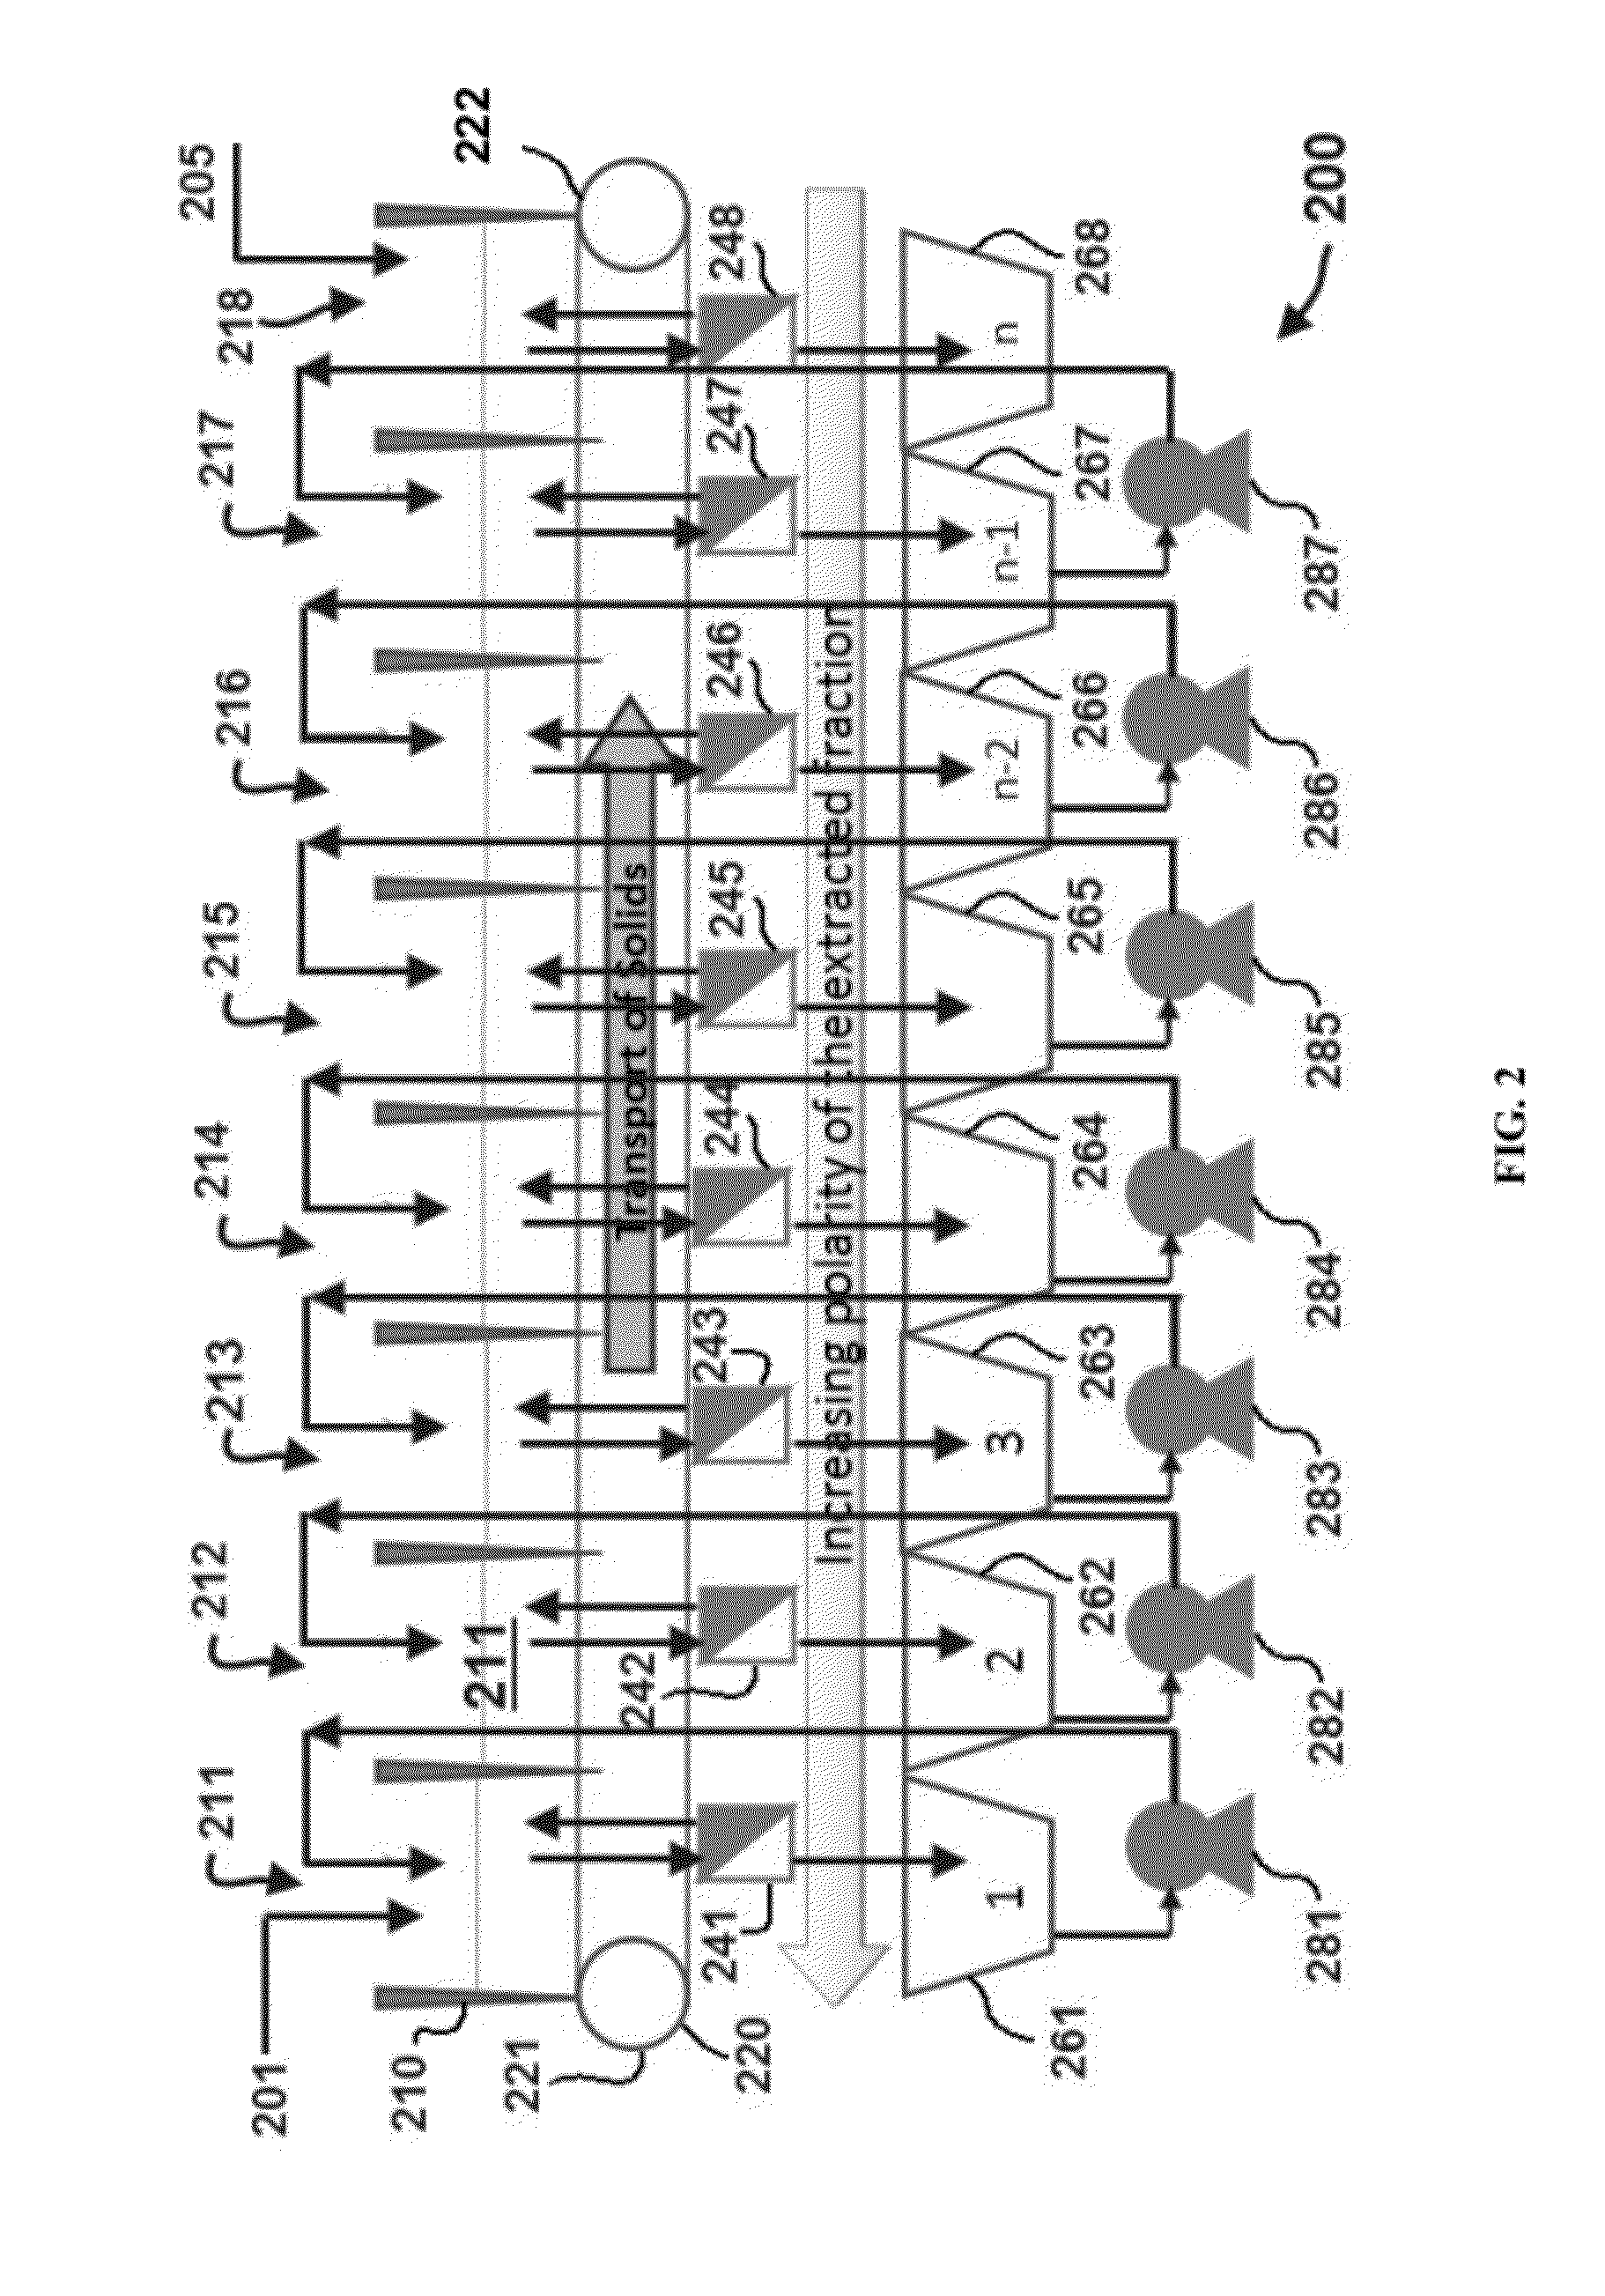 Methods of and systems for producing biofuels from algal oil